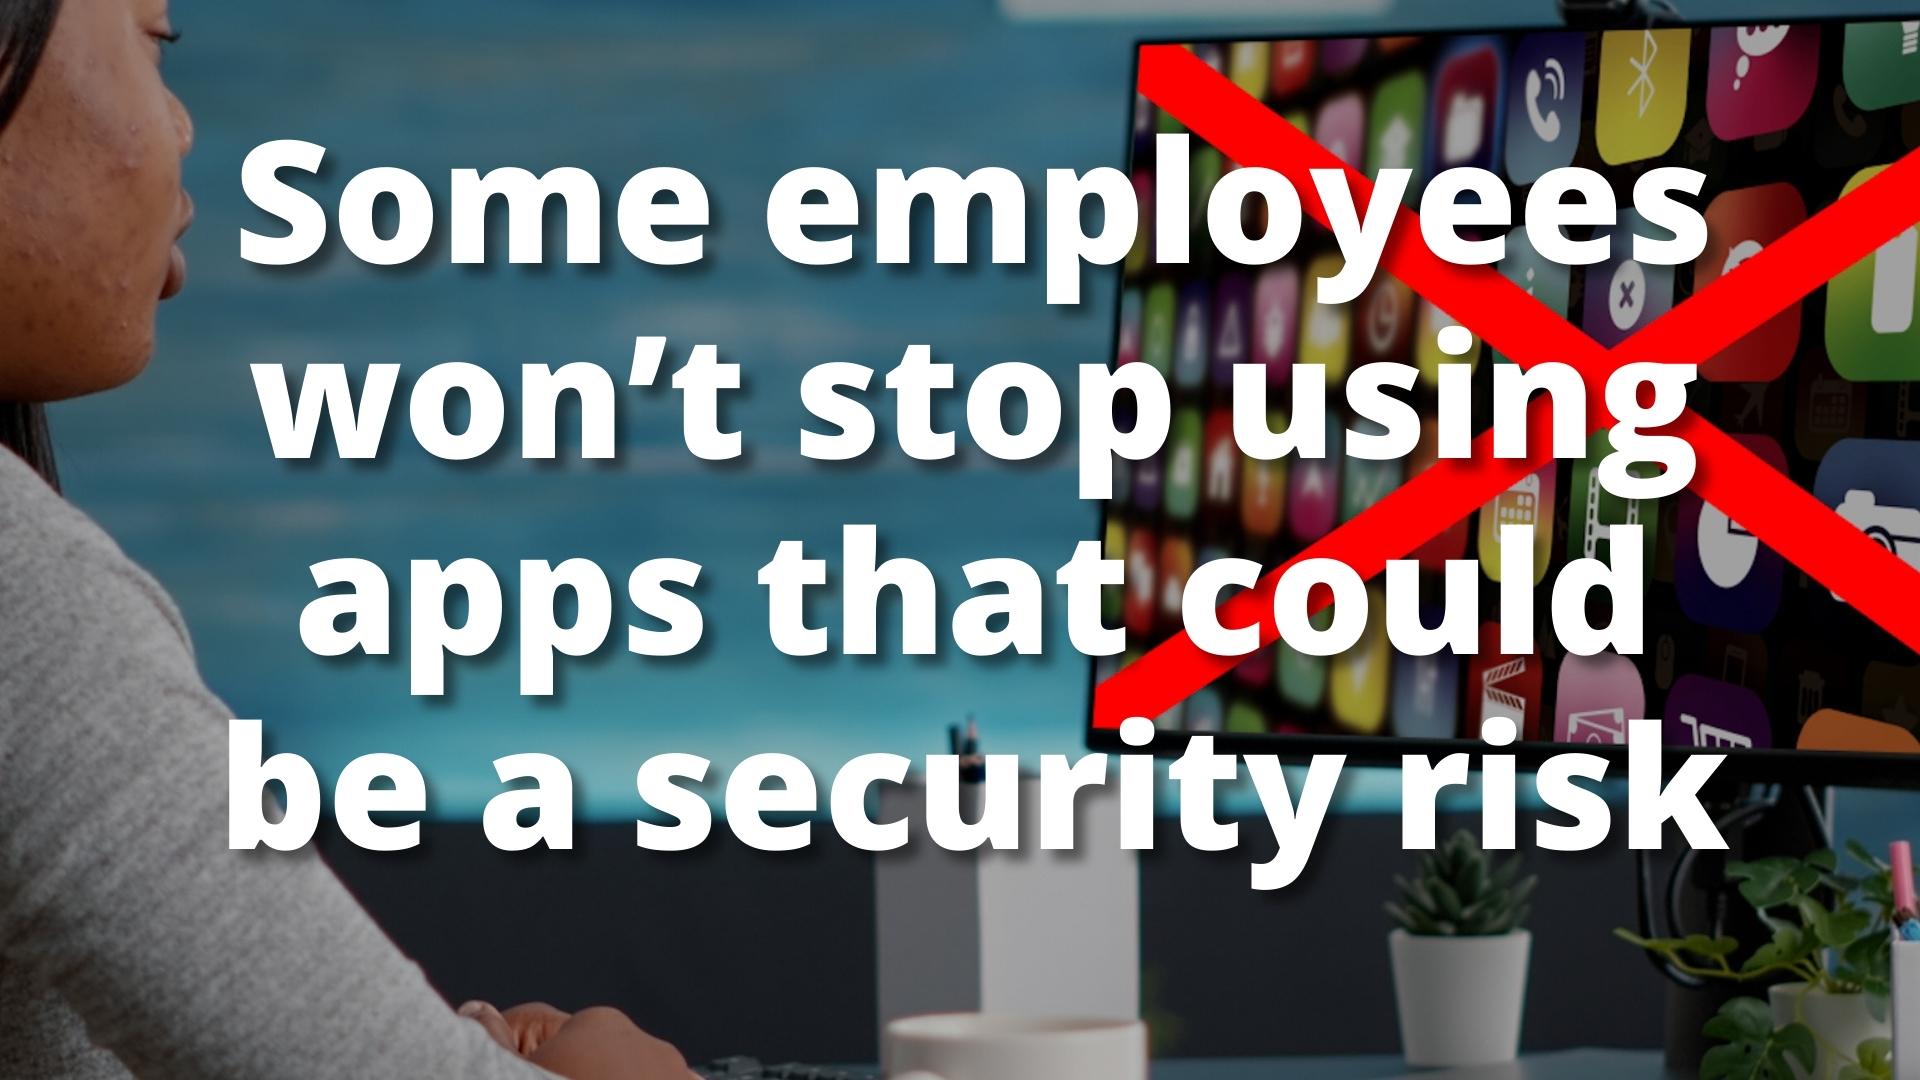 Employees won’t stop using apps that could be a security risk